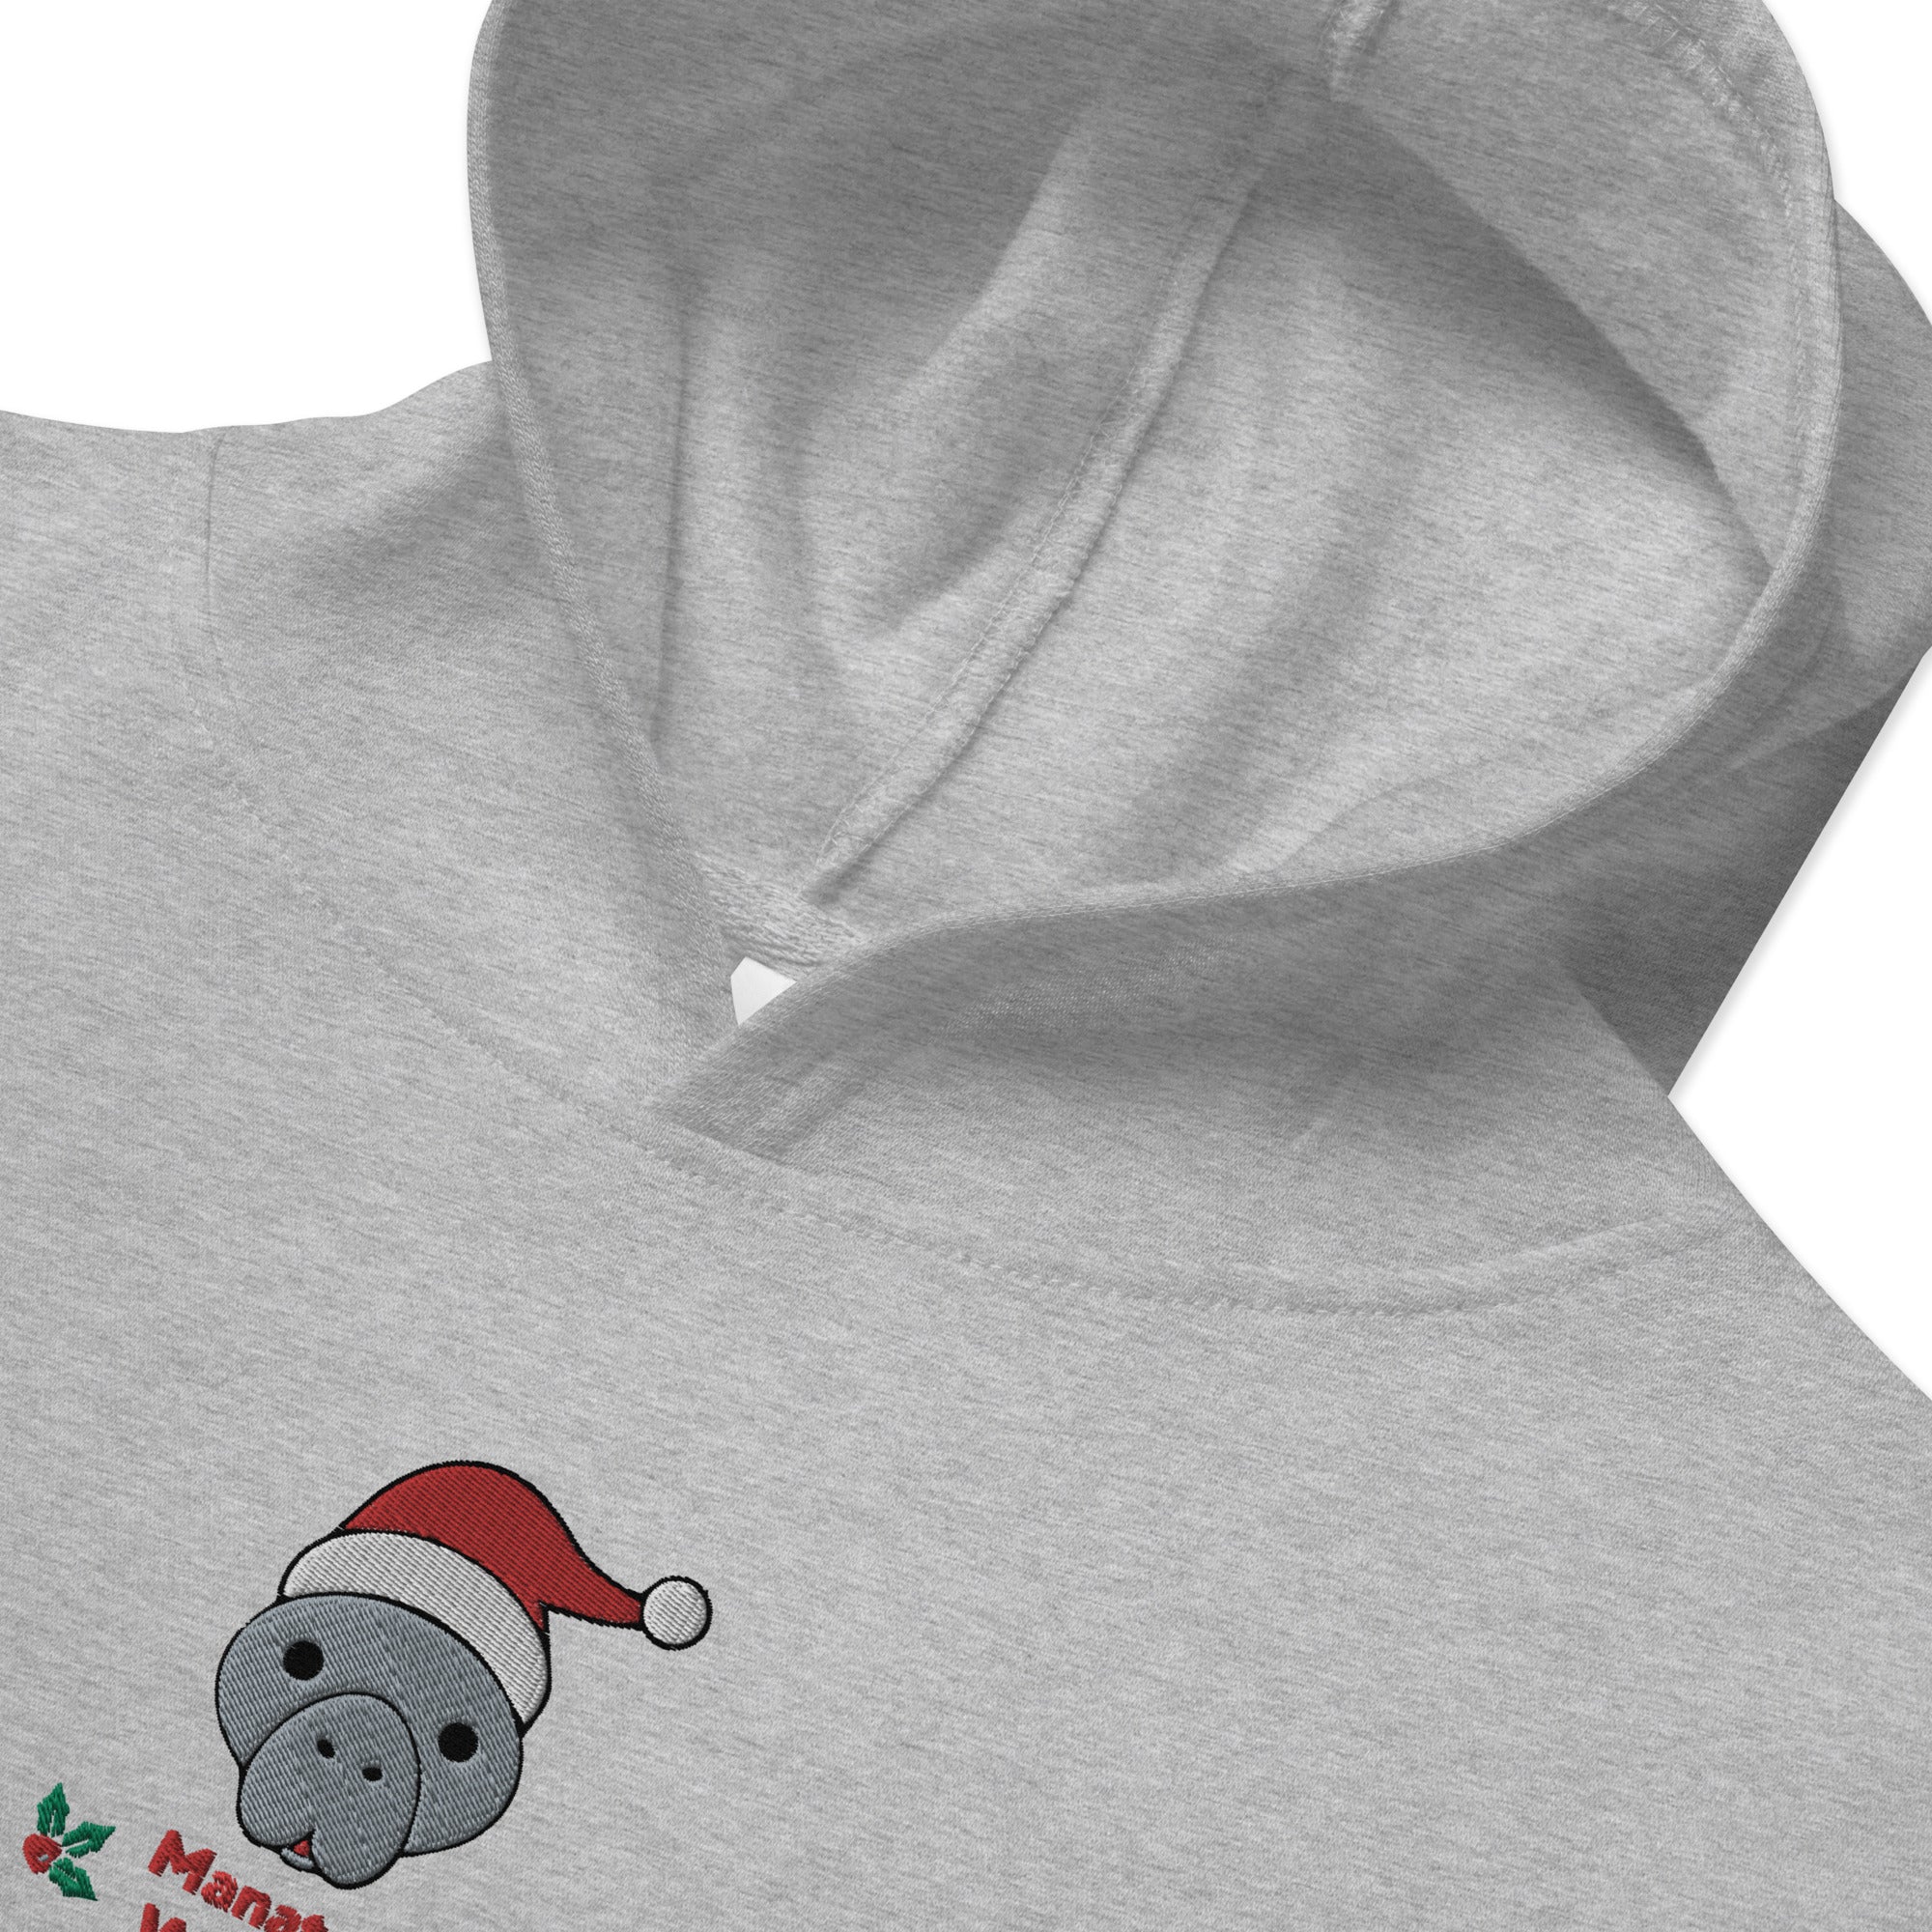 Embroidered Manatee Holiday Wishes Kids Christmas Hoodie